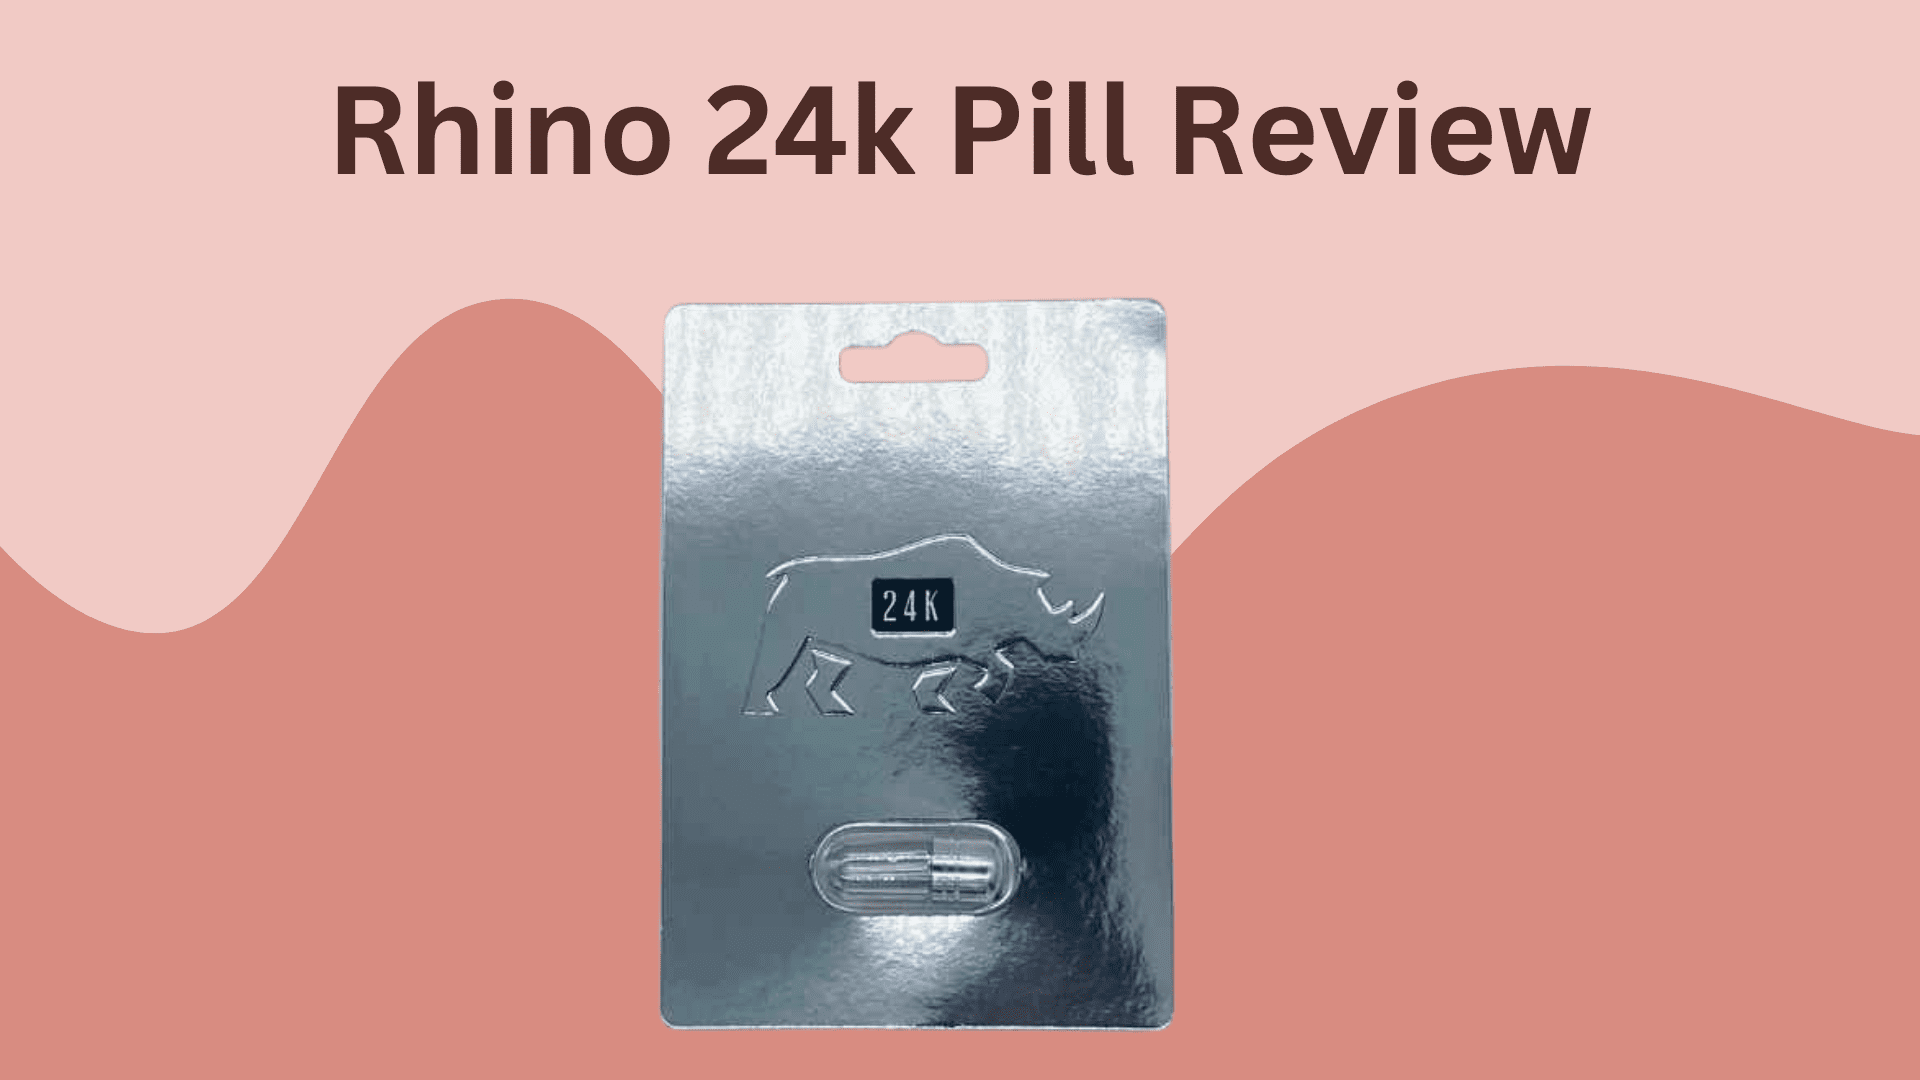 Rhino 24k Pills Review: Does It Support Male Enhancement?